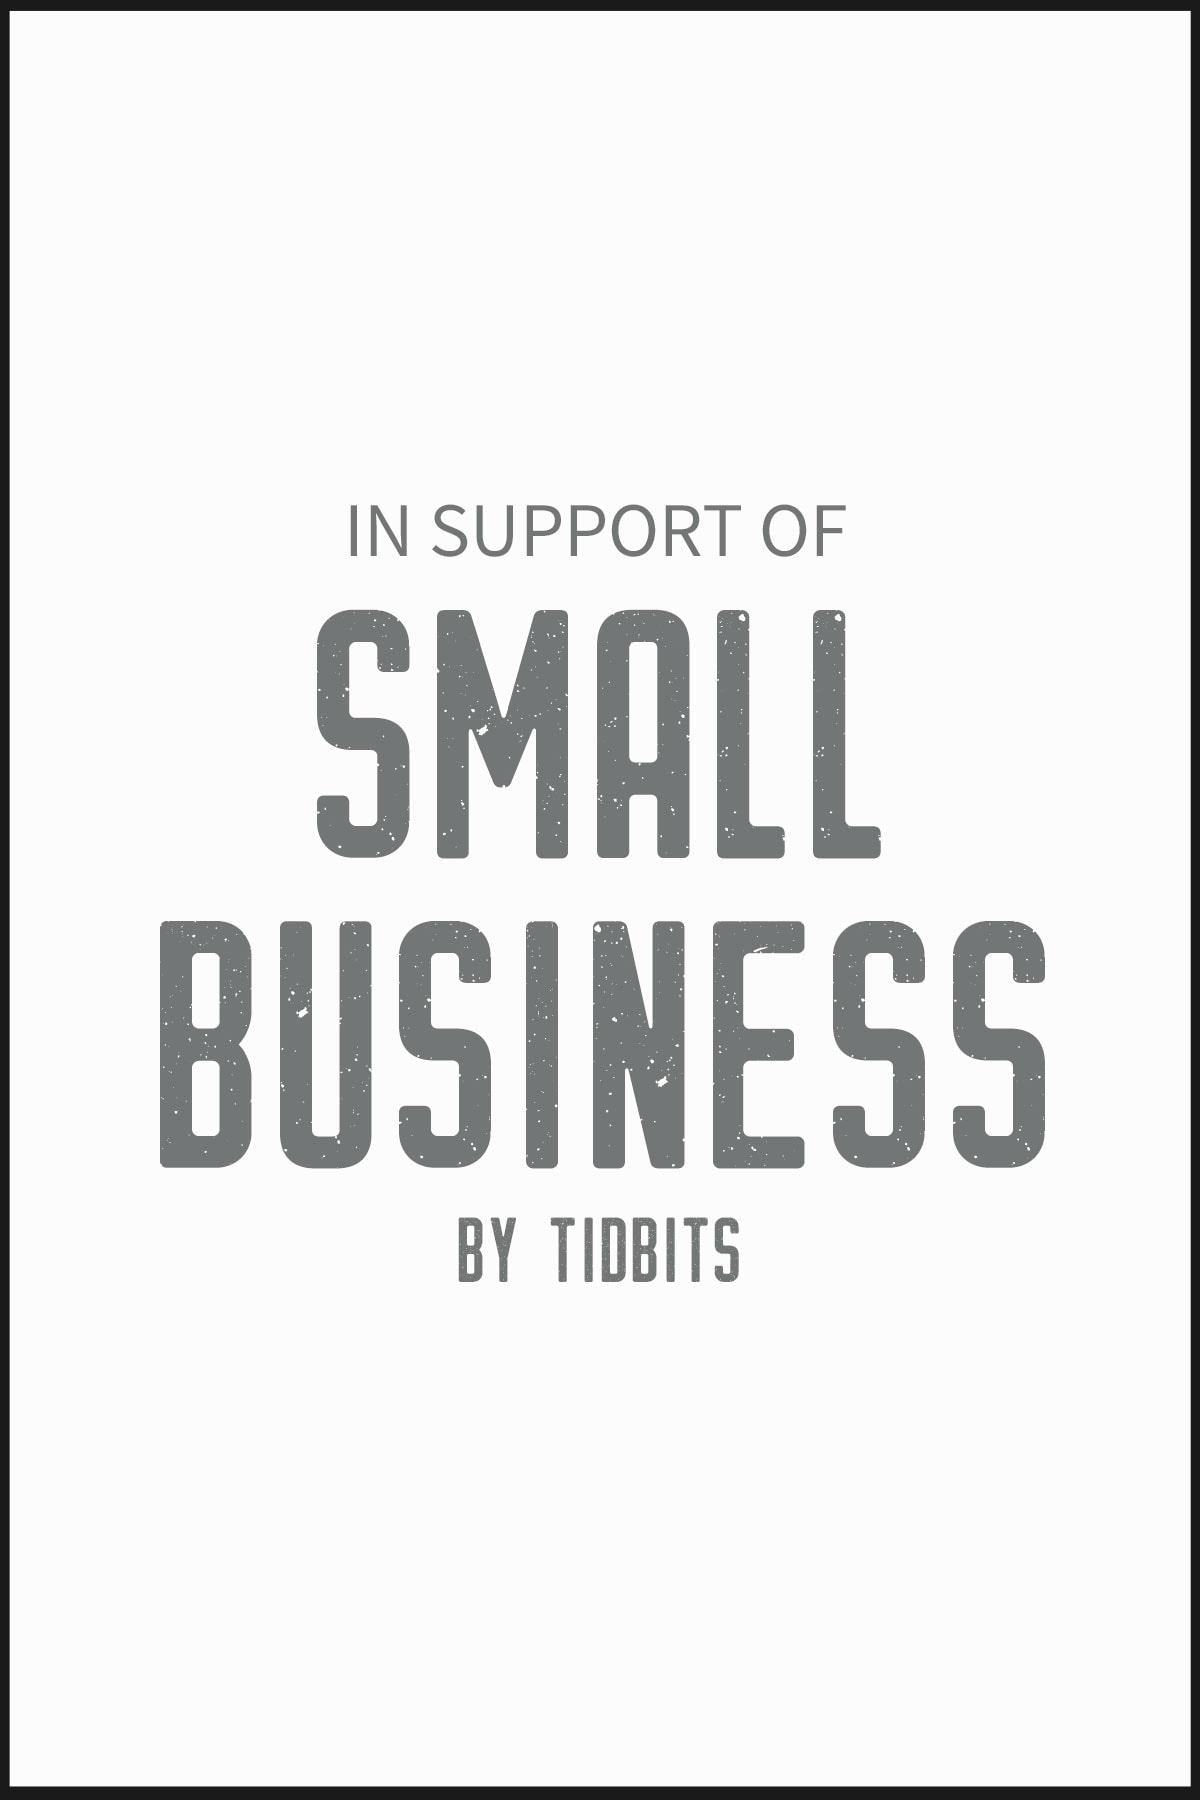 IN SUPPORT OF SMALL BUSINESS, BY TIDBITS